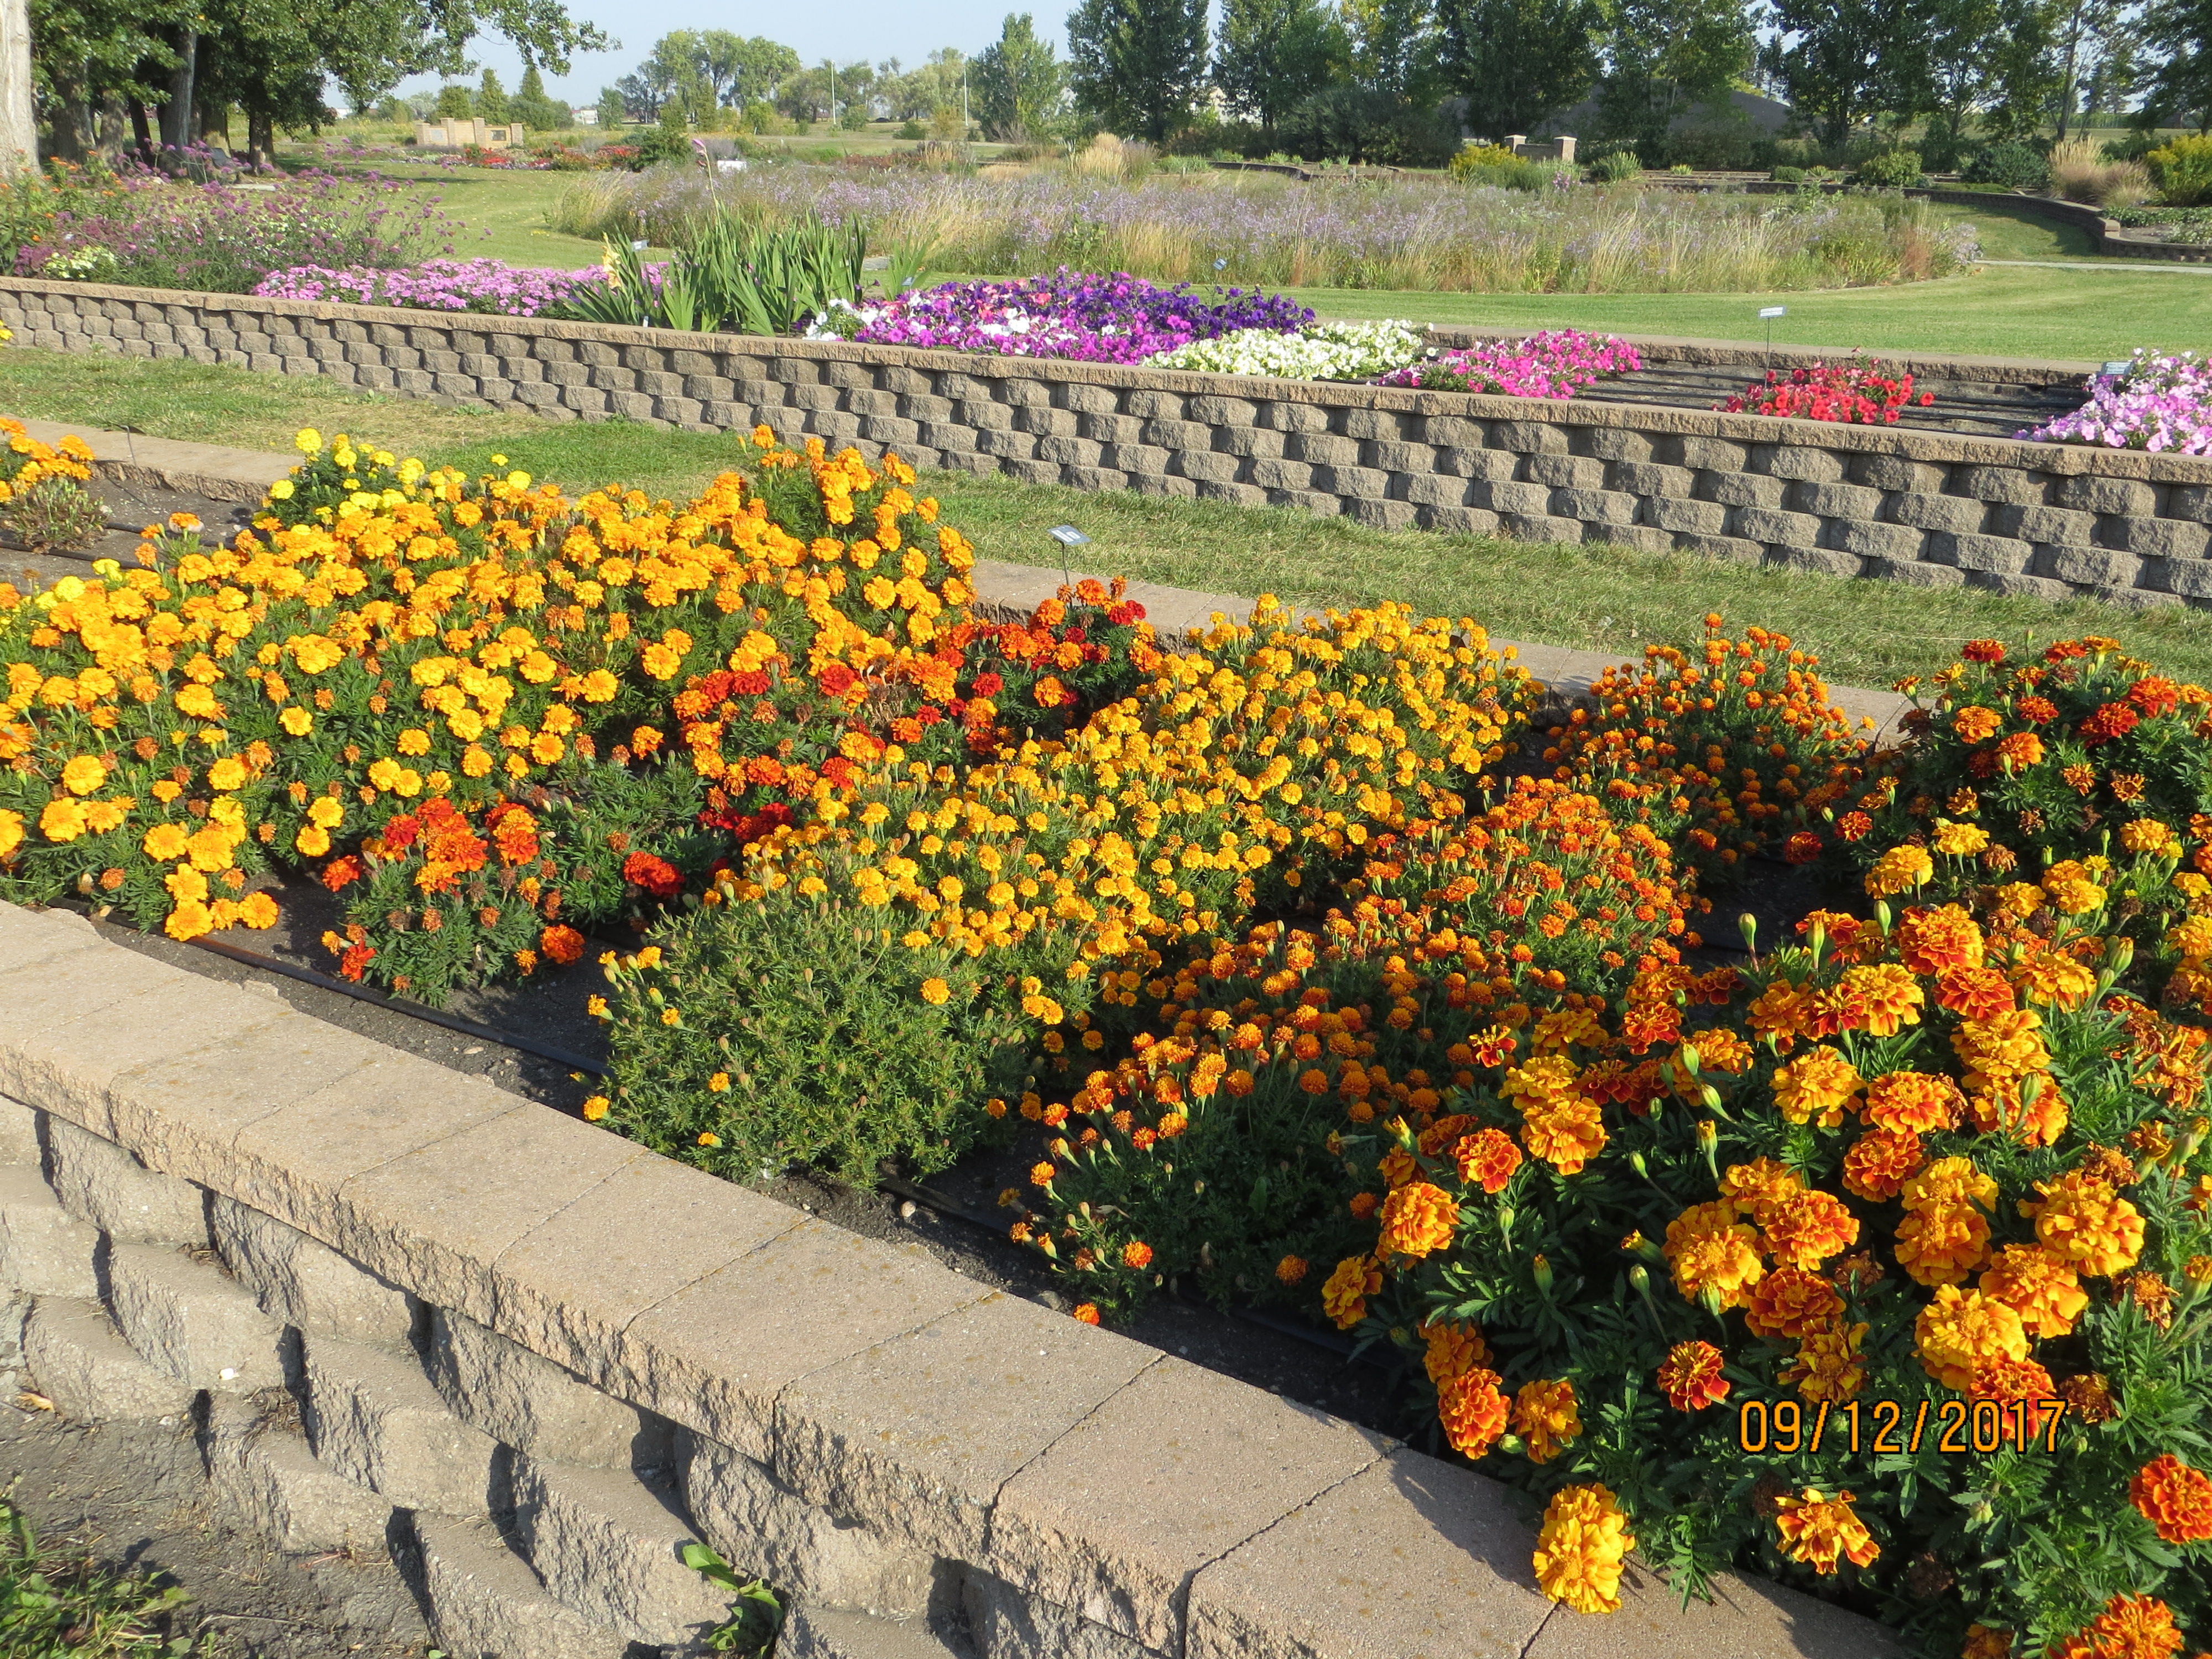 Walking tours will be part of the gardening event at NDSU's Horticulture Research and Demonstration Gardens on Sept. 5. (NDSU photo)